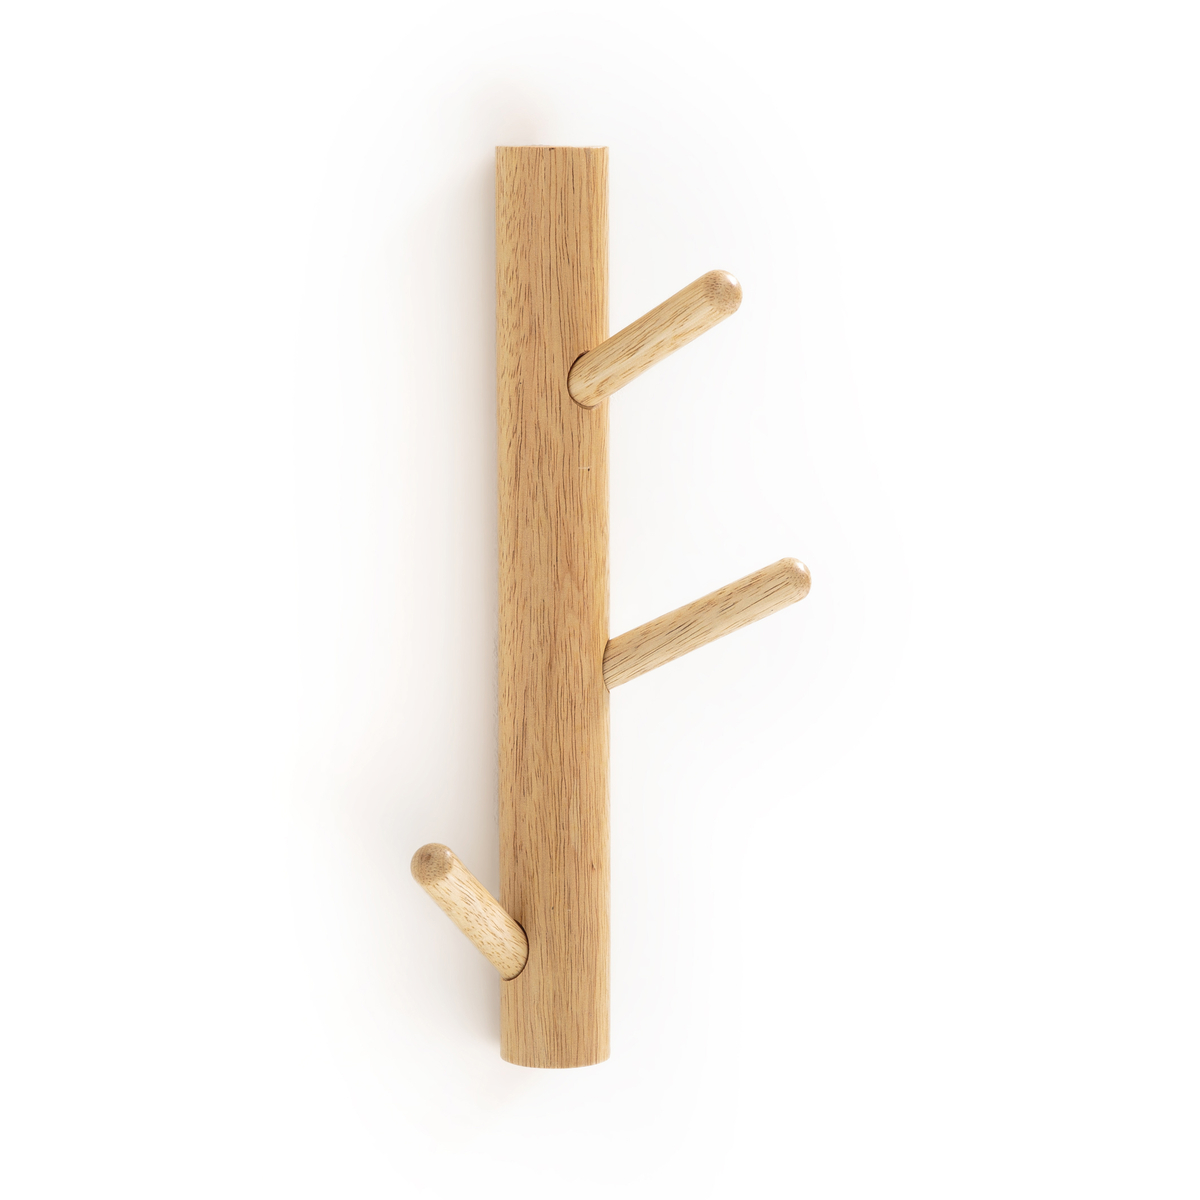 Suspenso Wooden Wall Coat Rack with 3 Hooks